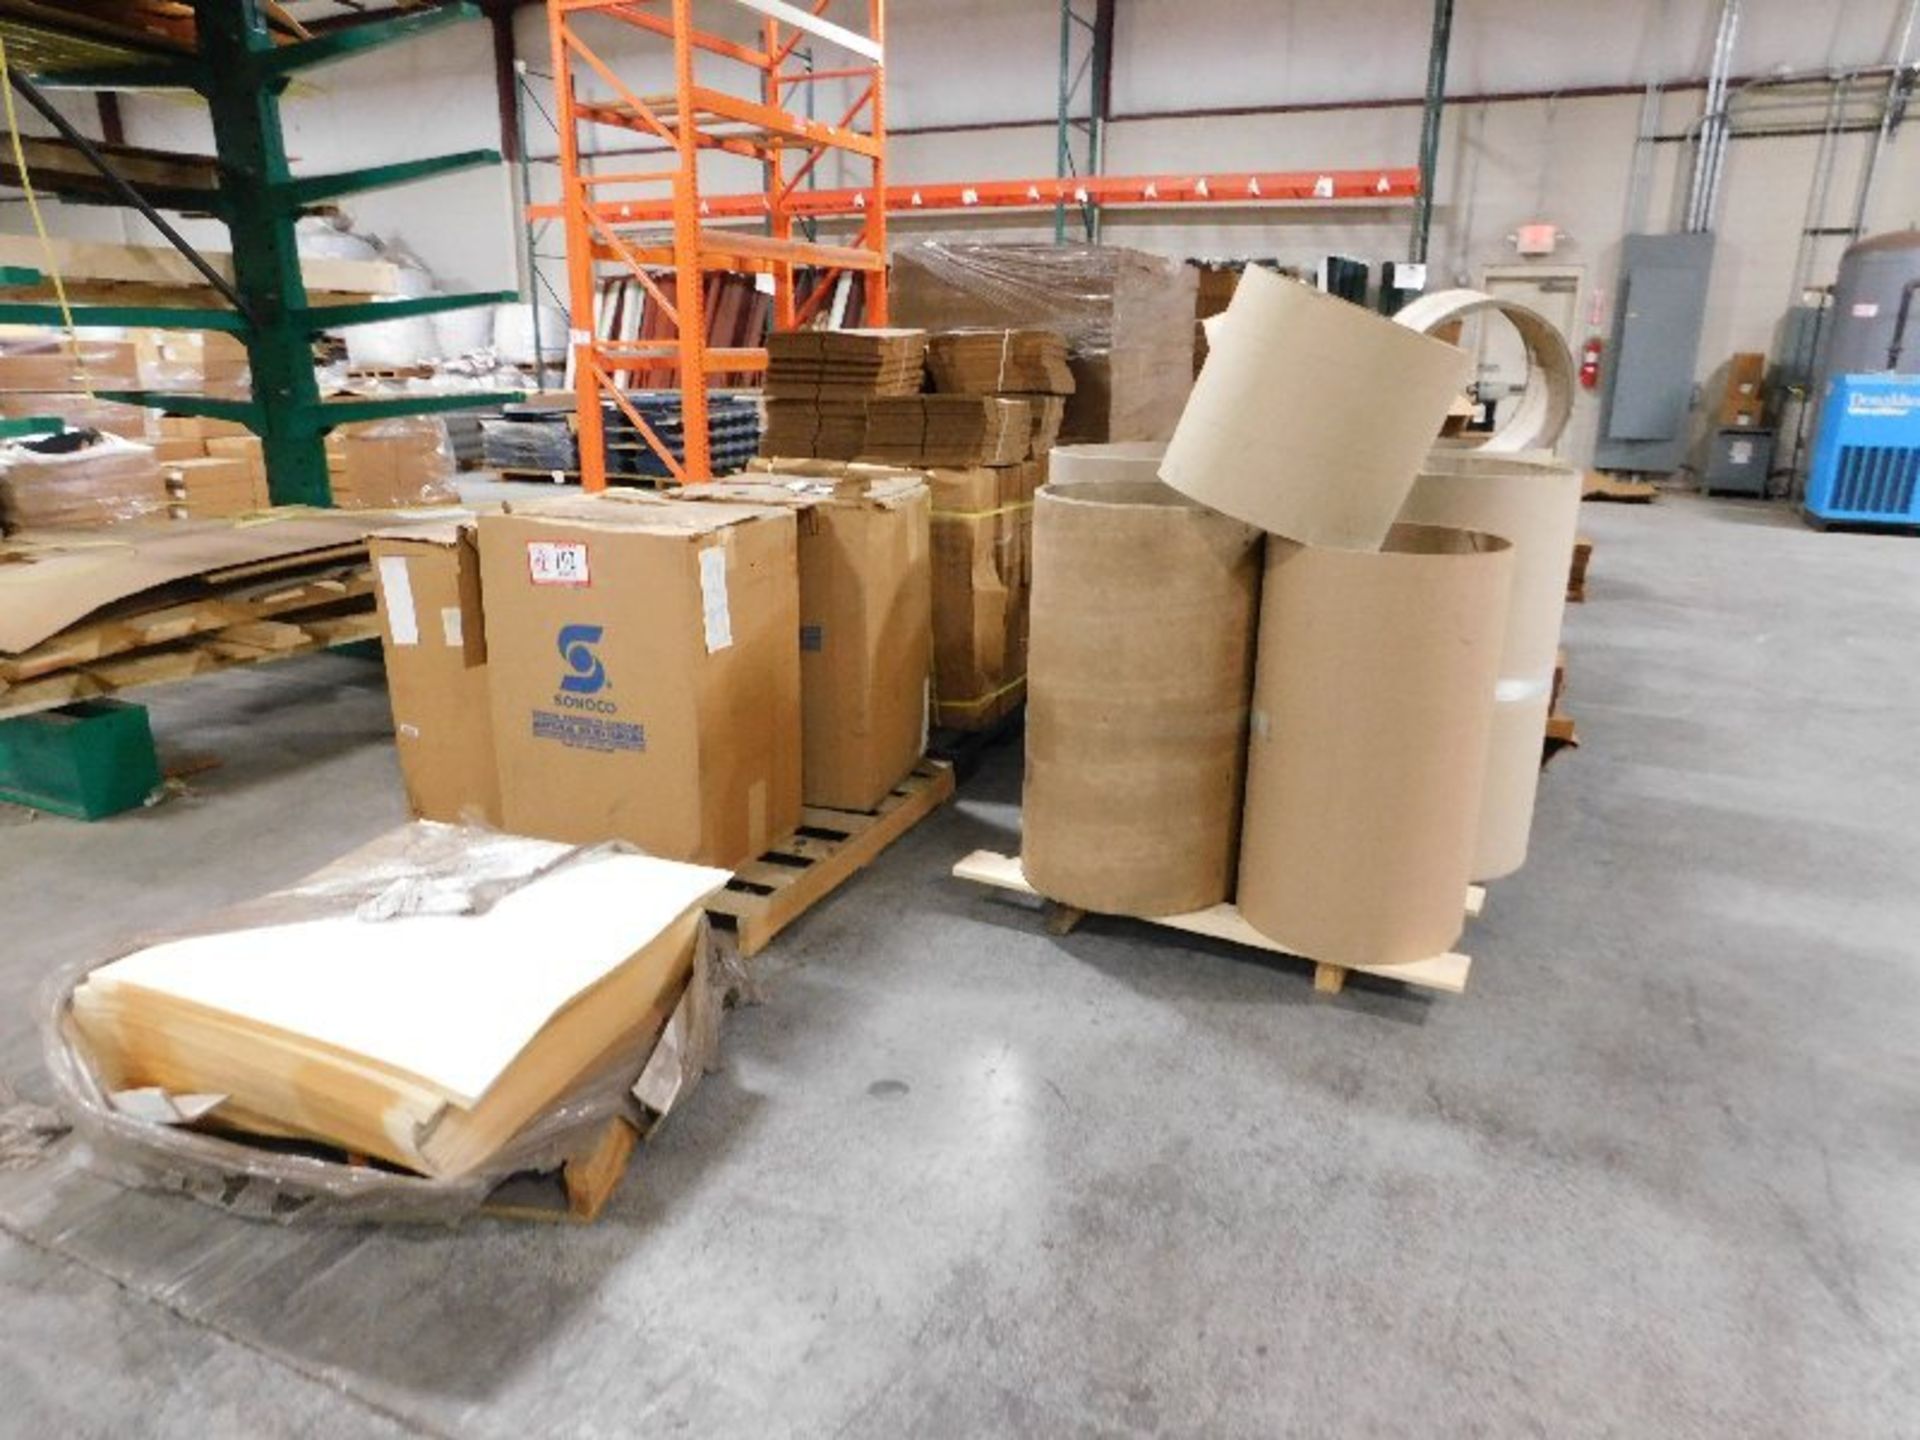 (8) Pallets, Large Surplus Inventory Cardboard Boxes, Packing Material, etc.